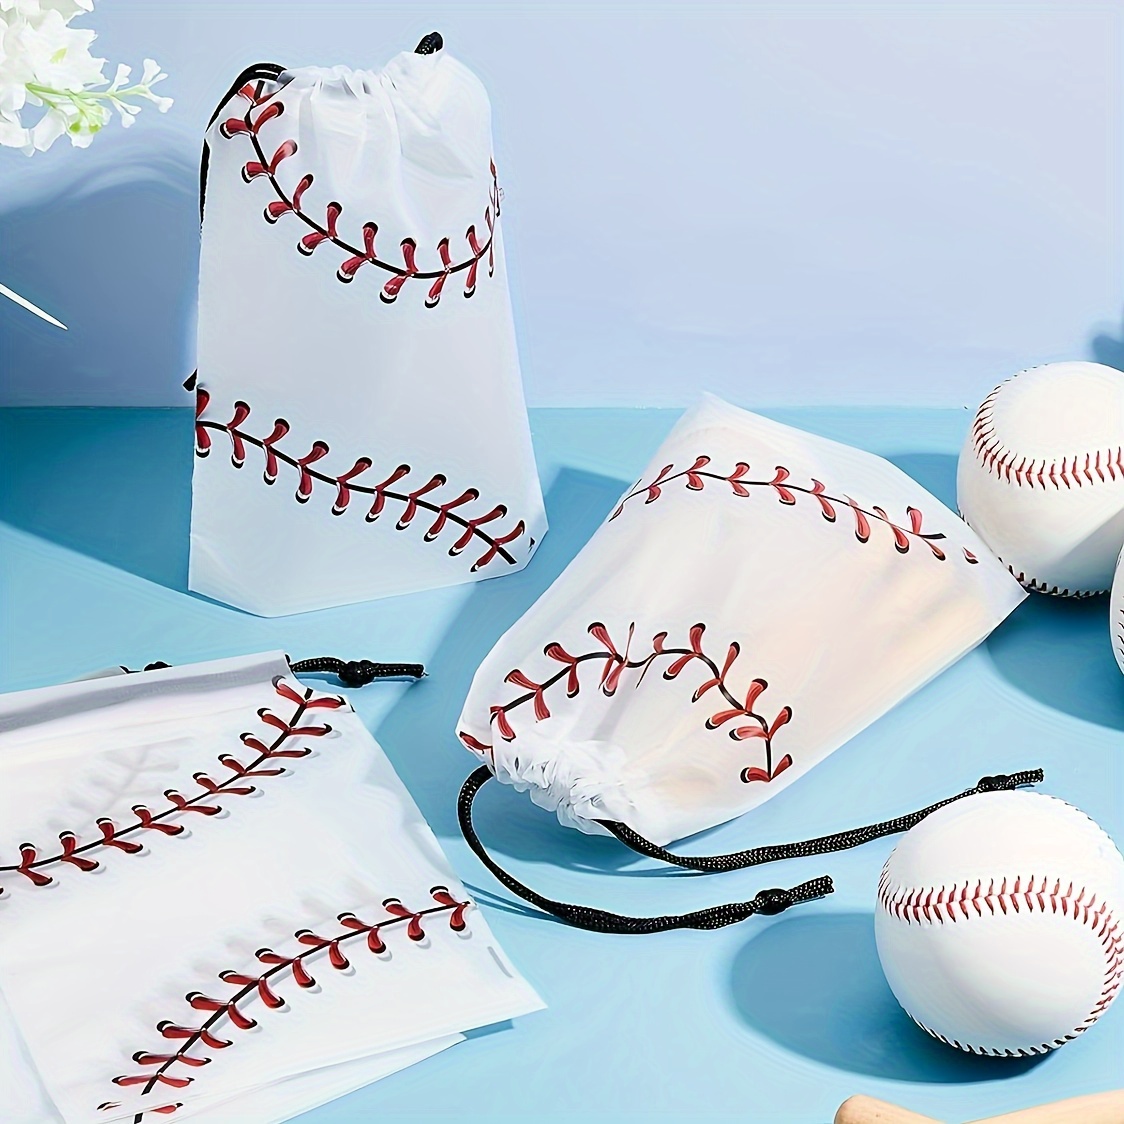 

30pcs Baseball Party Drawstring Bags, Plastic Gift Tote For Boys' Birthday, Baseball Theme Party Favors And Supplies